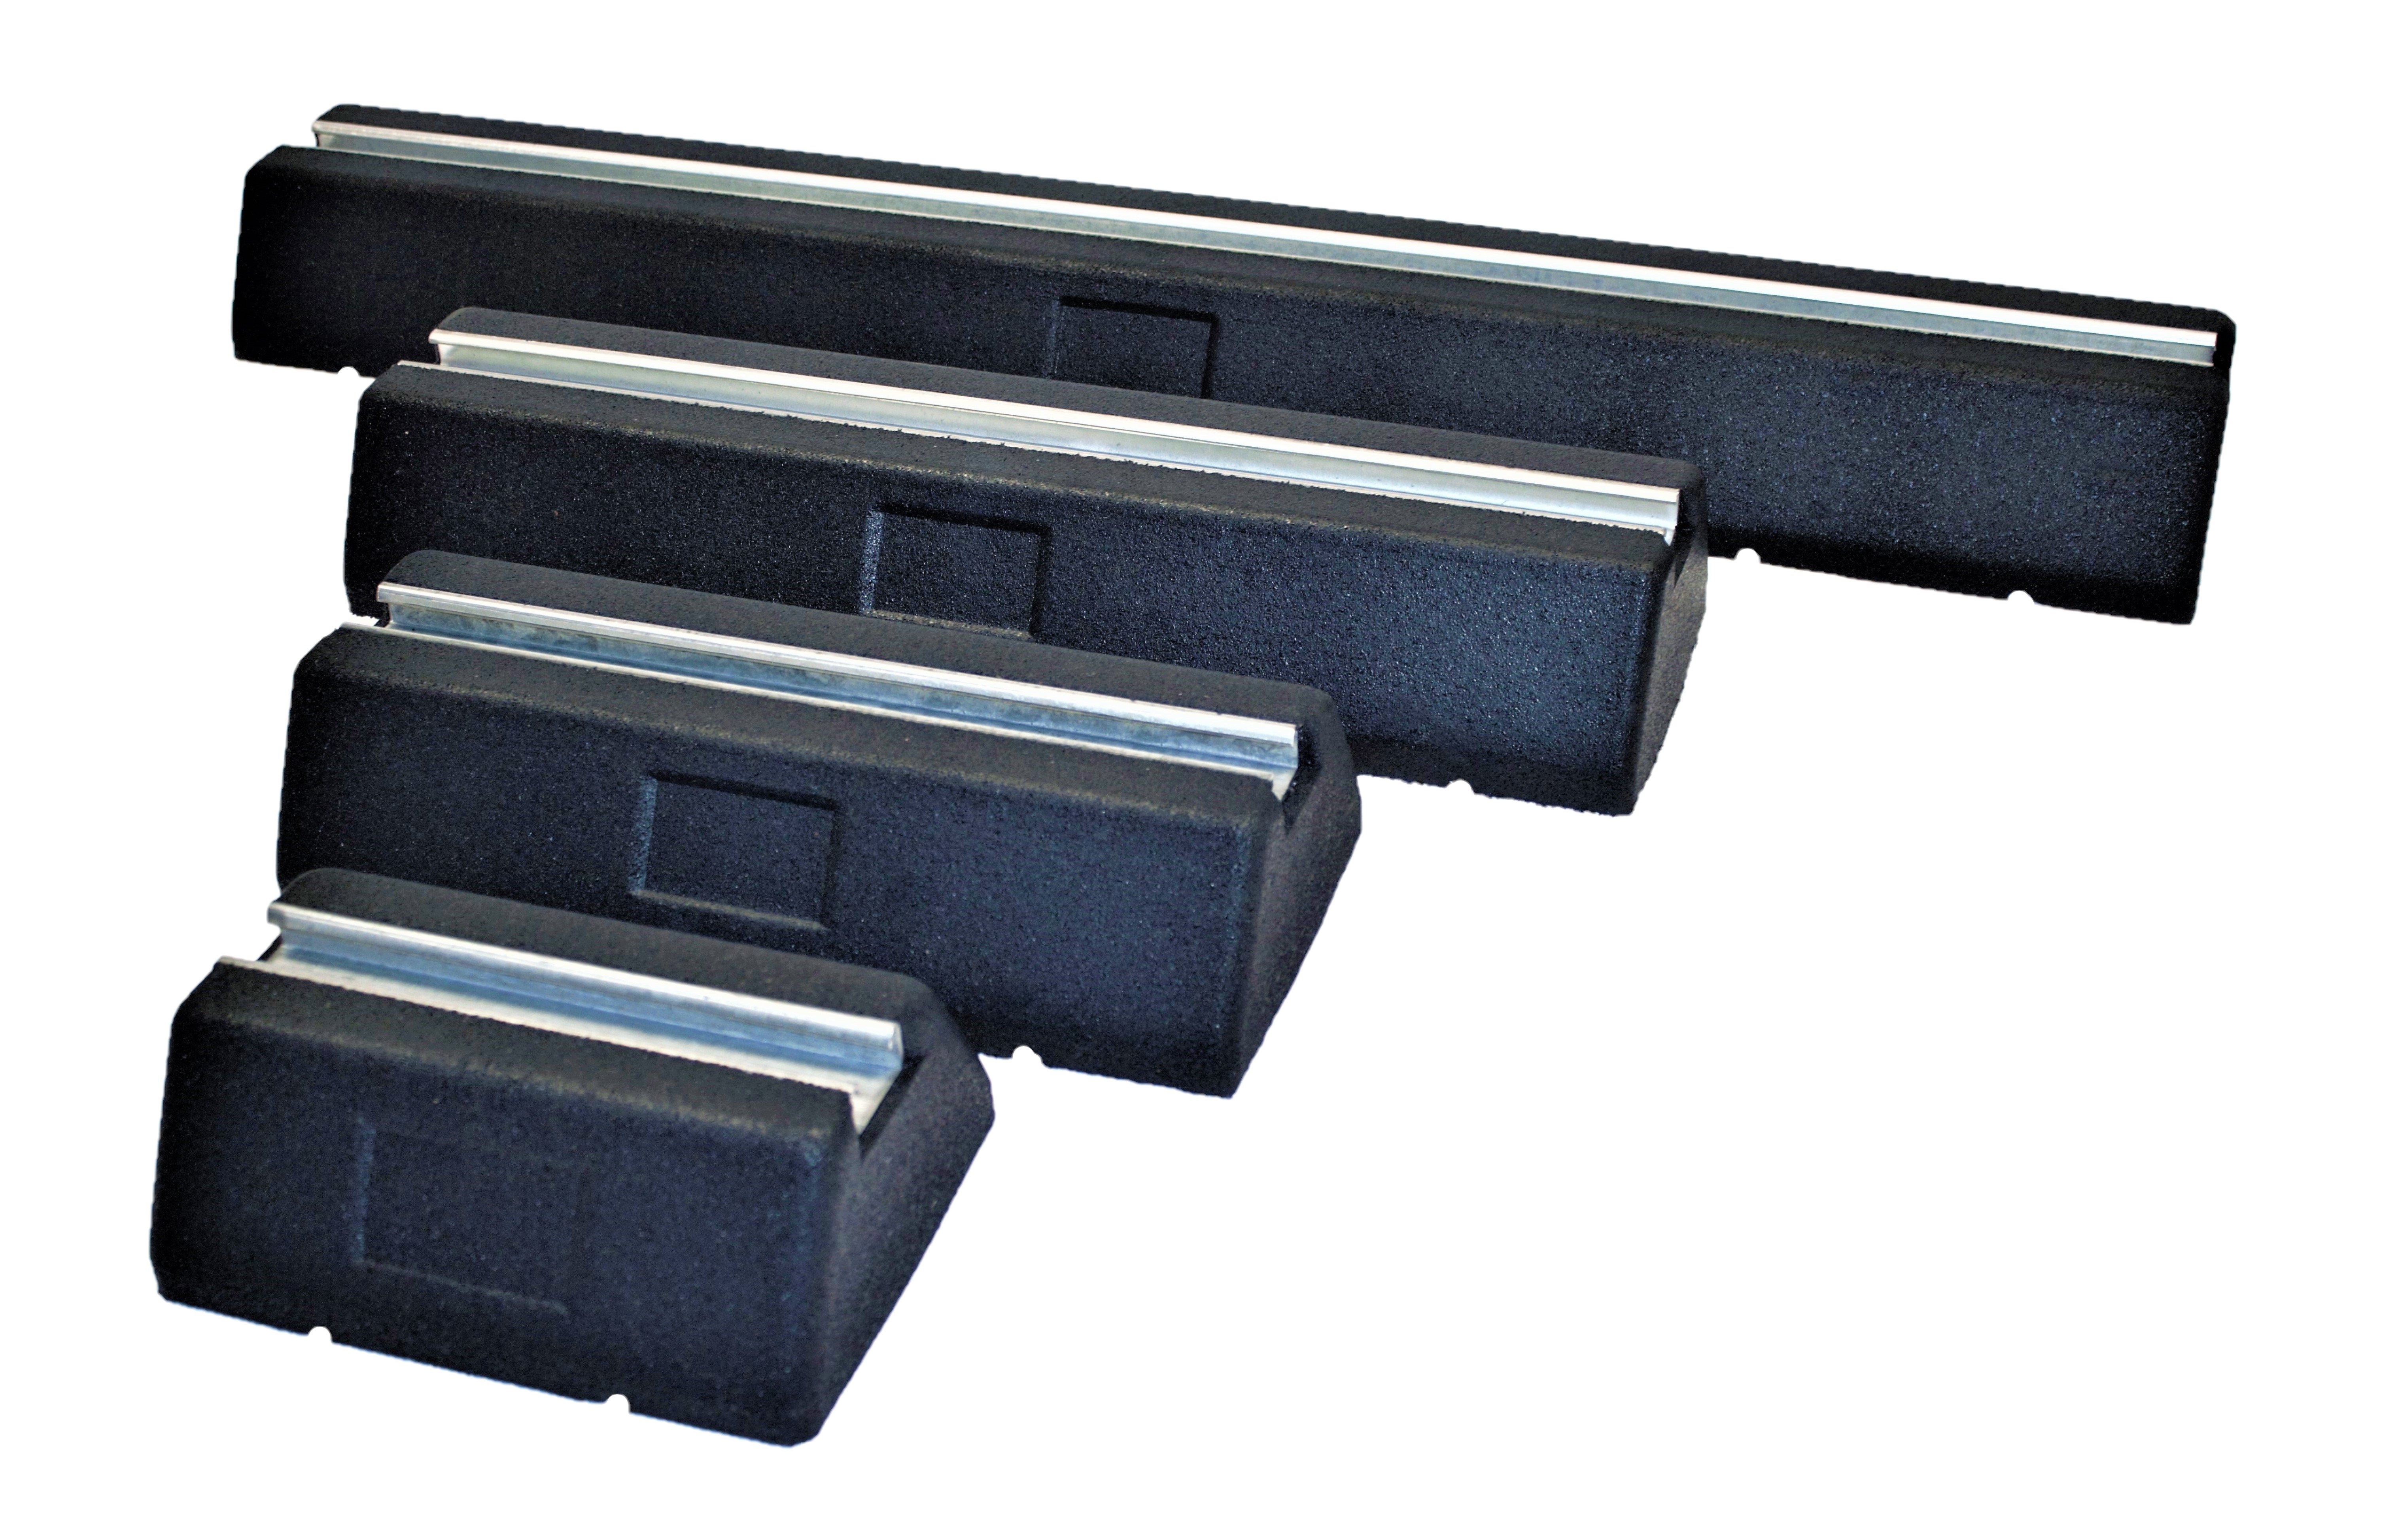 StrutFoot Flat Roof Support Systems